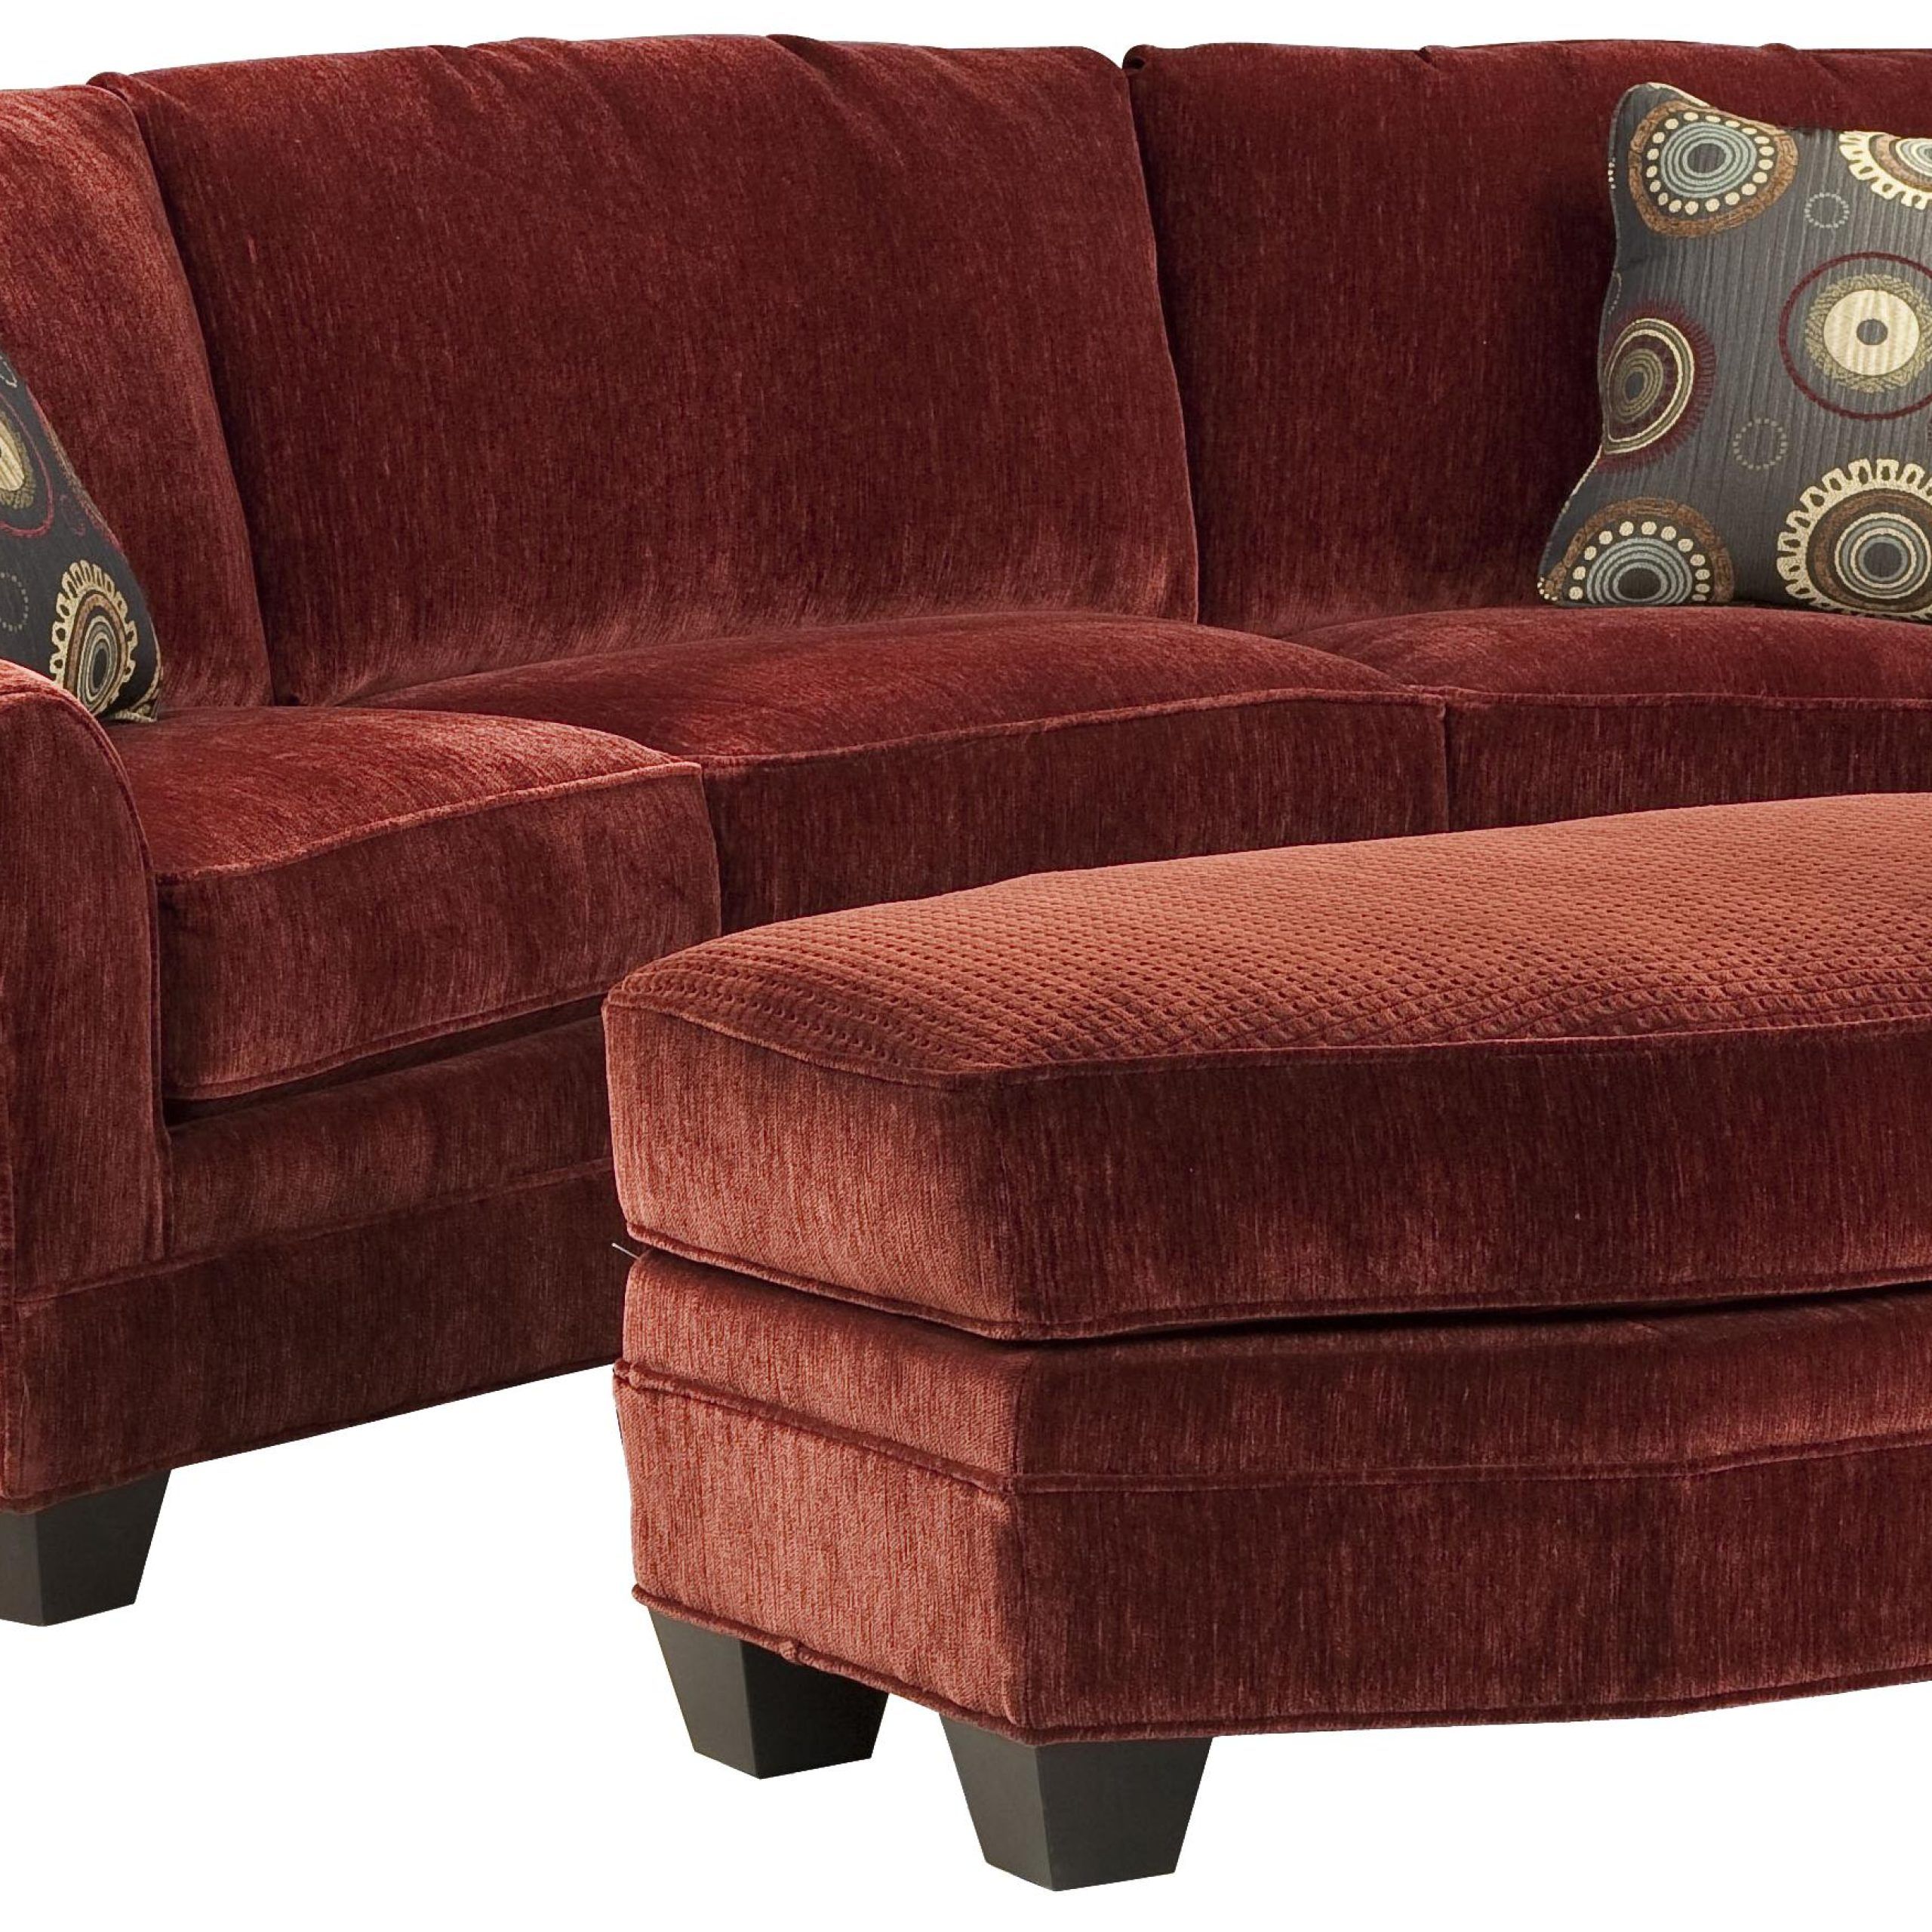 Fairfield Sofa Accents Curved Conversation Sofa With Traditional Rolled Regarding Sofas With Curved Arms (Gallery 3 of 20)